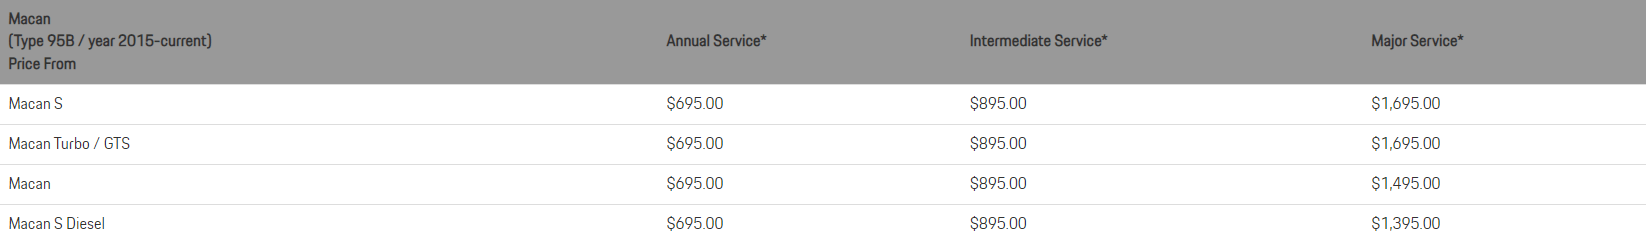 Macan Service Pricing